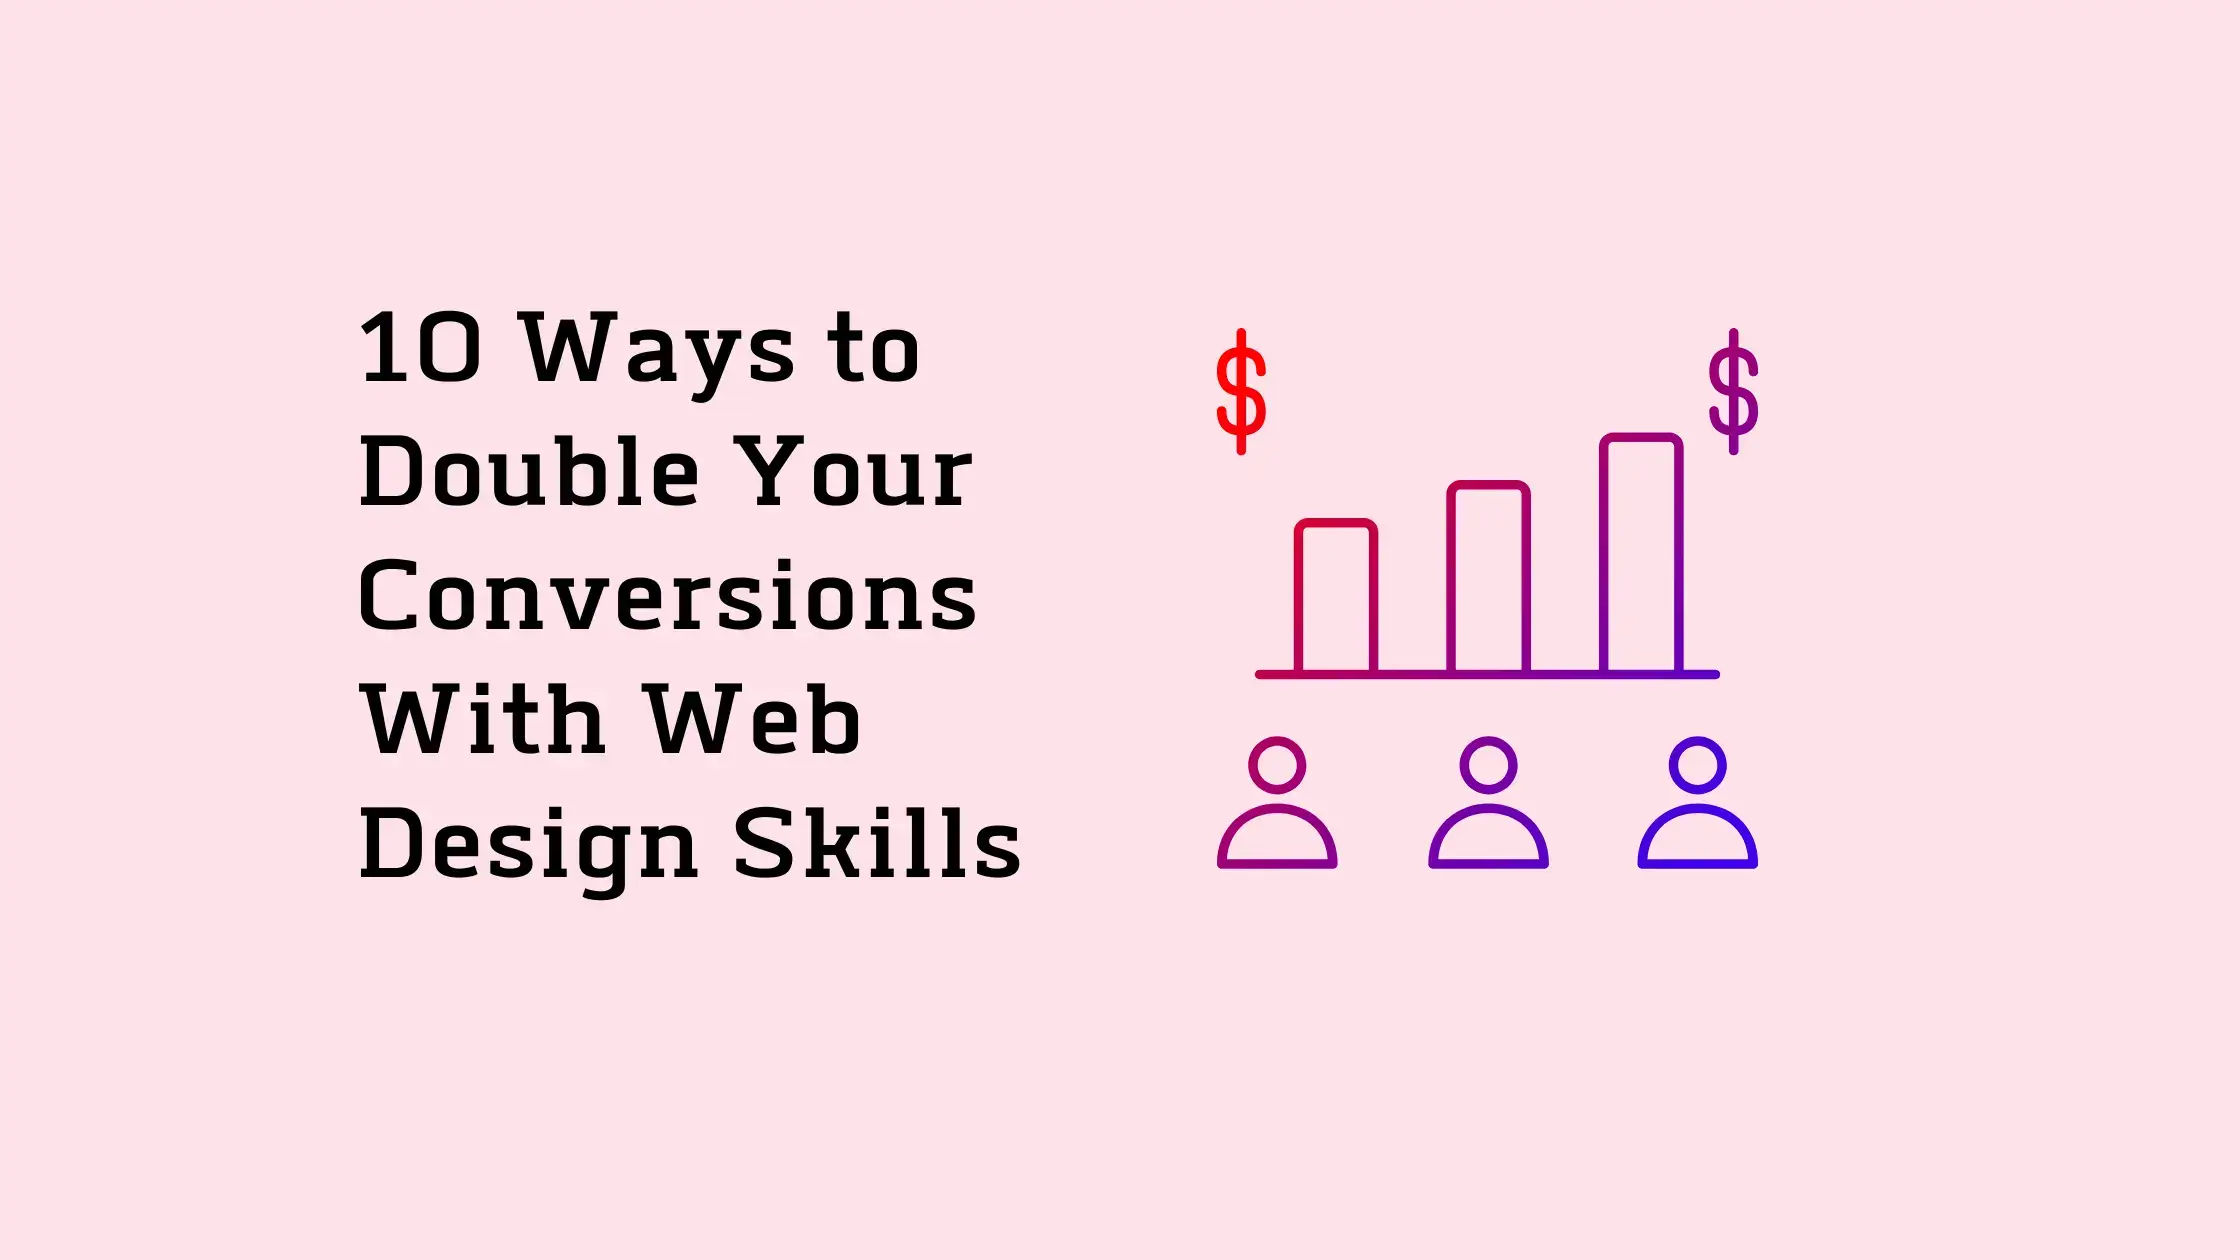 10-Ways-to-Double-Your-Conversions-With-Web-Design-Skills